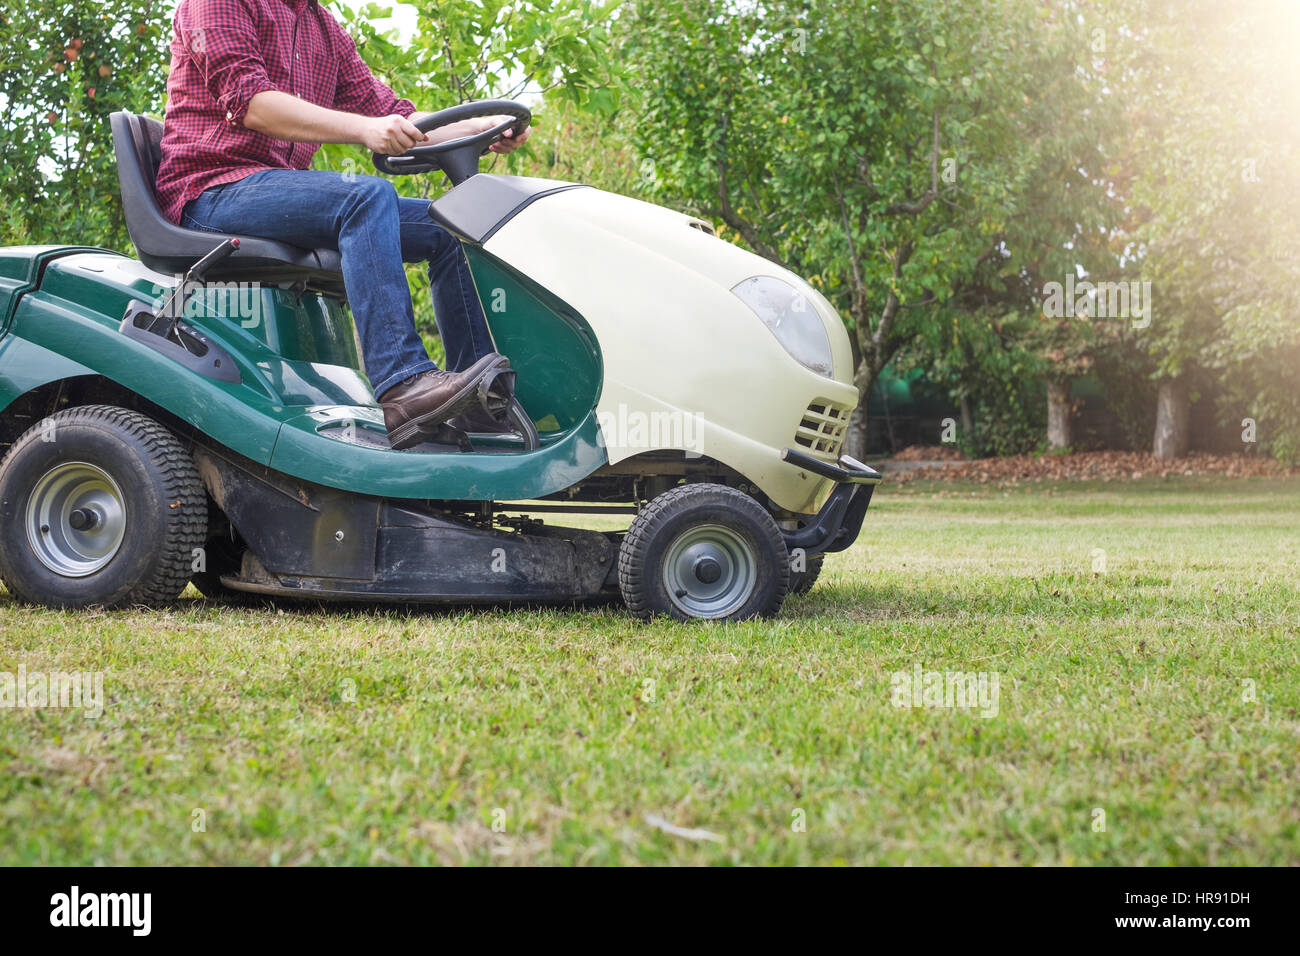 Gardener cutting the grass of a garden seated on a lawn mower Stock Photo